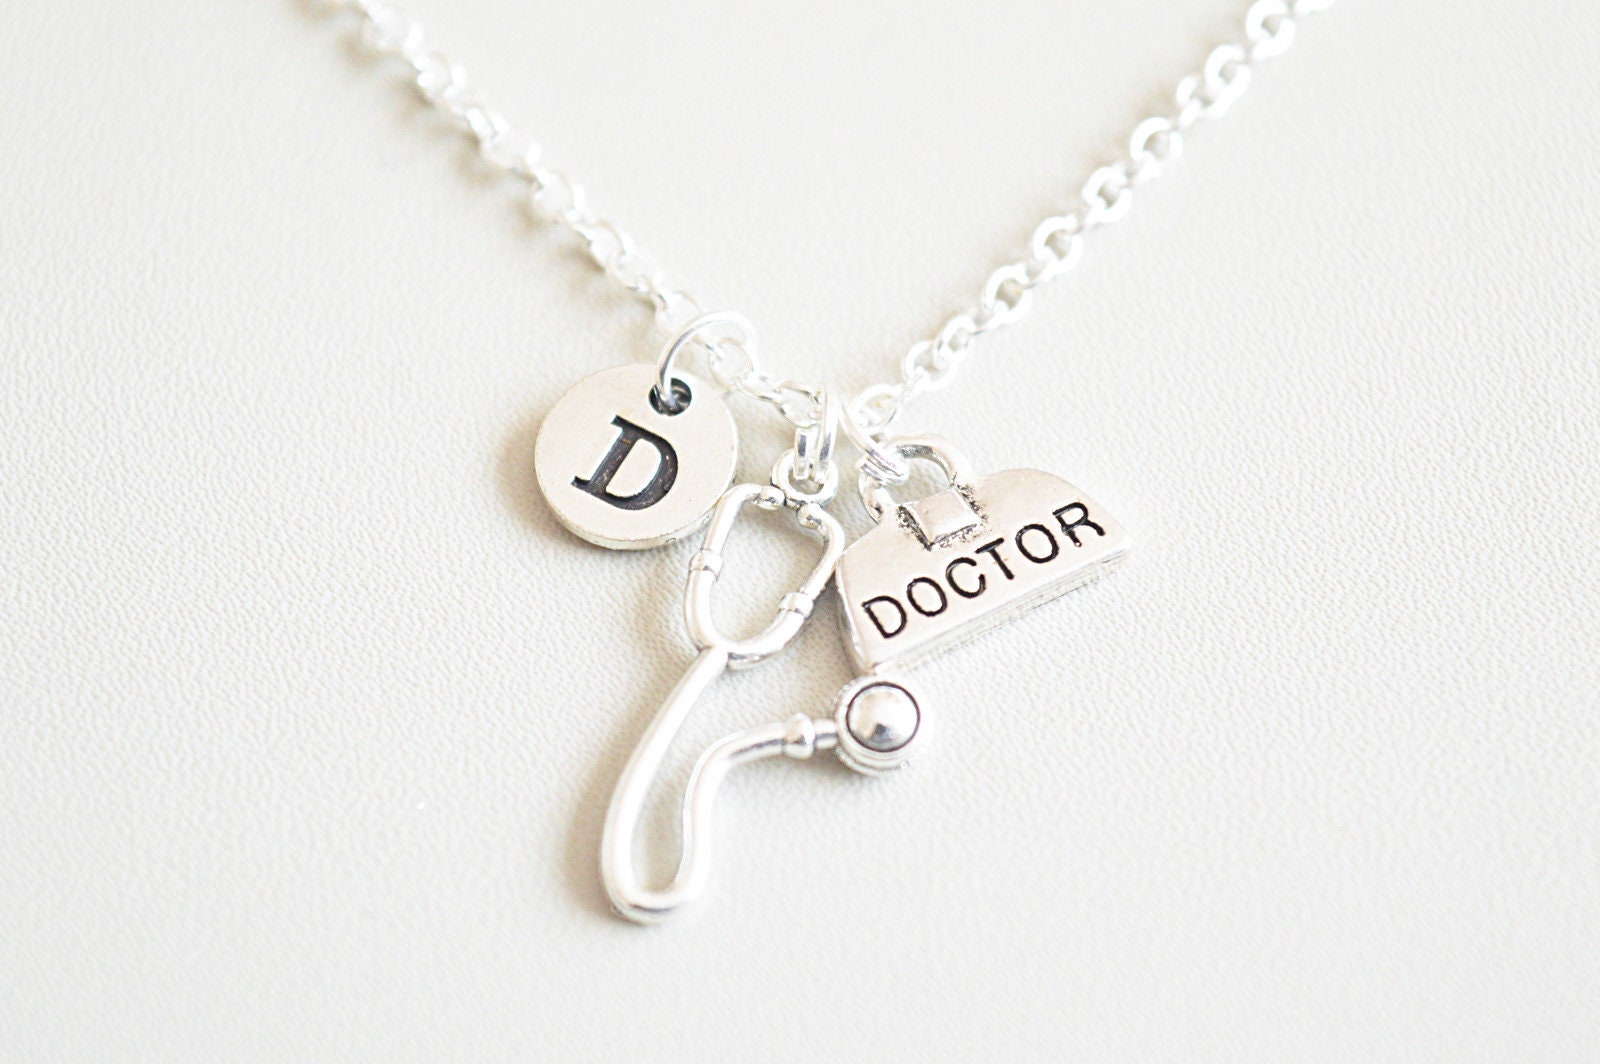 Stethoscope Necklace, Doctor Necklace, Doctor, Doctor Gift, Stethescope Necklace, Doctor Jewelry, Medical NEcklace, Student, Medical Gift,